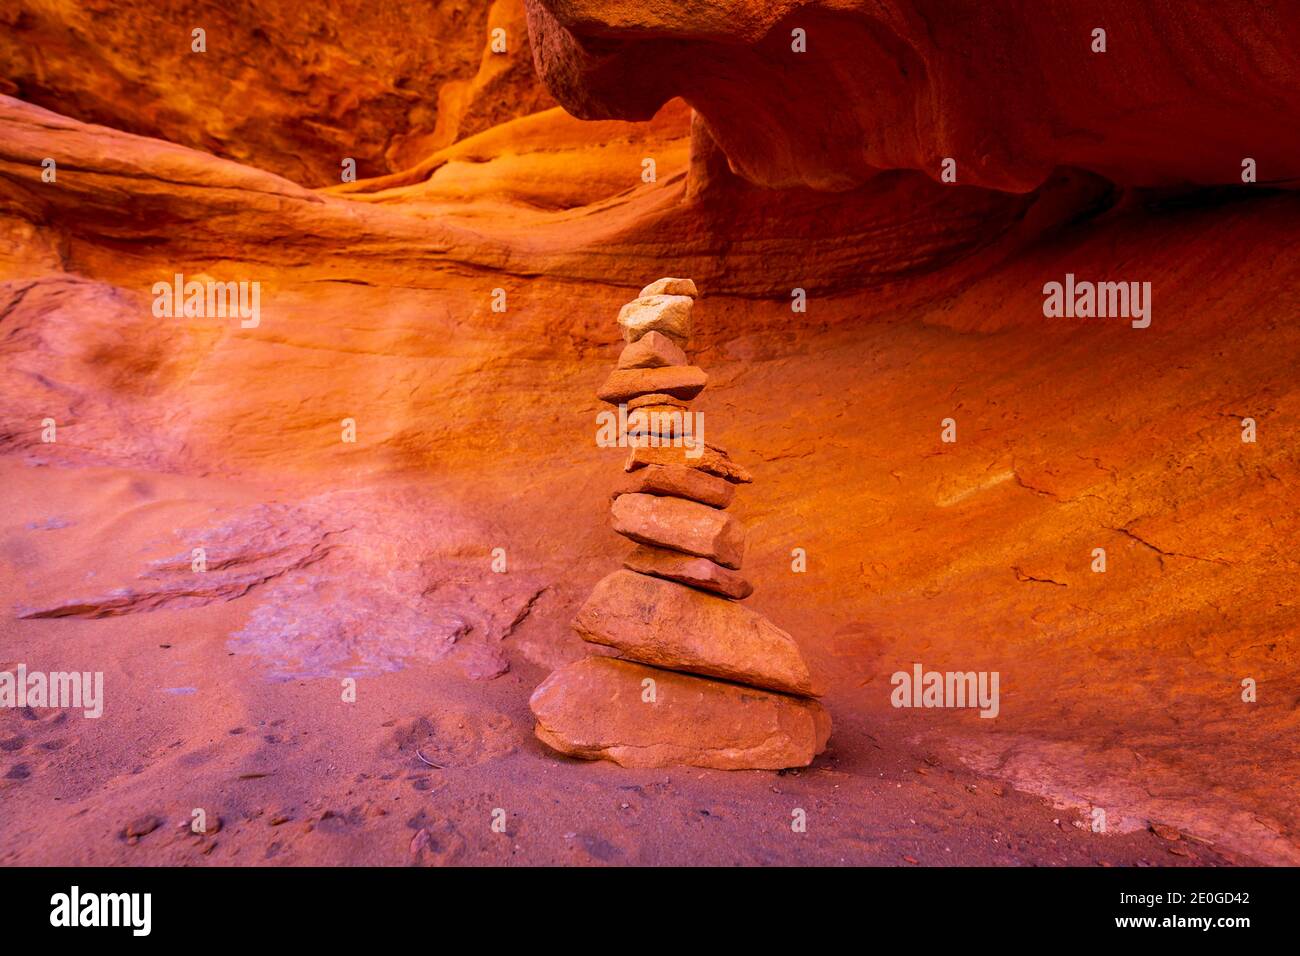 Red rock cairn in Devil's Garden, Arches National Park, Utah Stock Photo